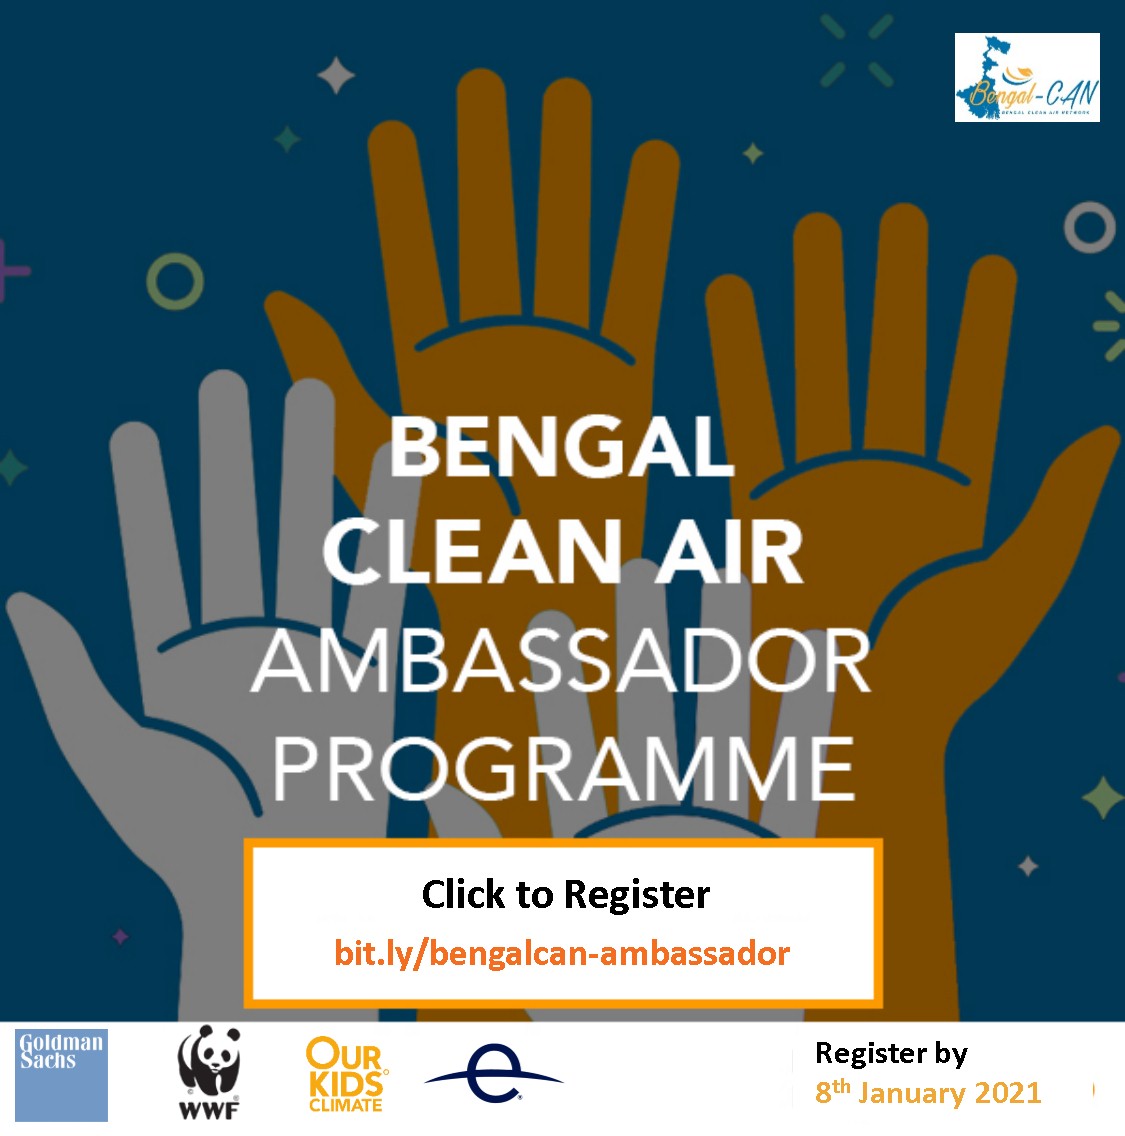 Are you a Young Changemaker? – Become a Bengal Clean Air Champion!